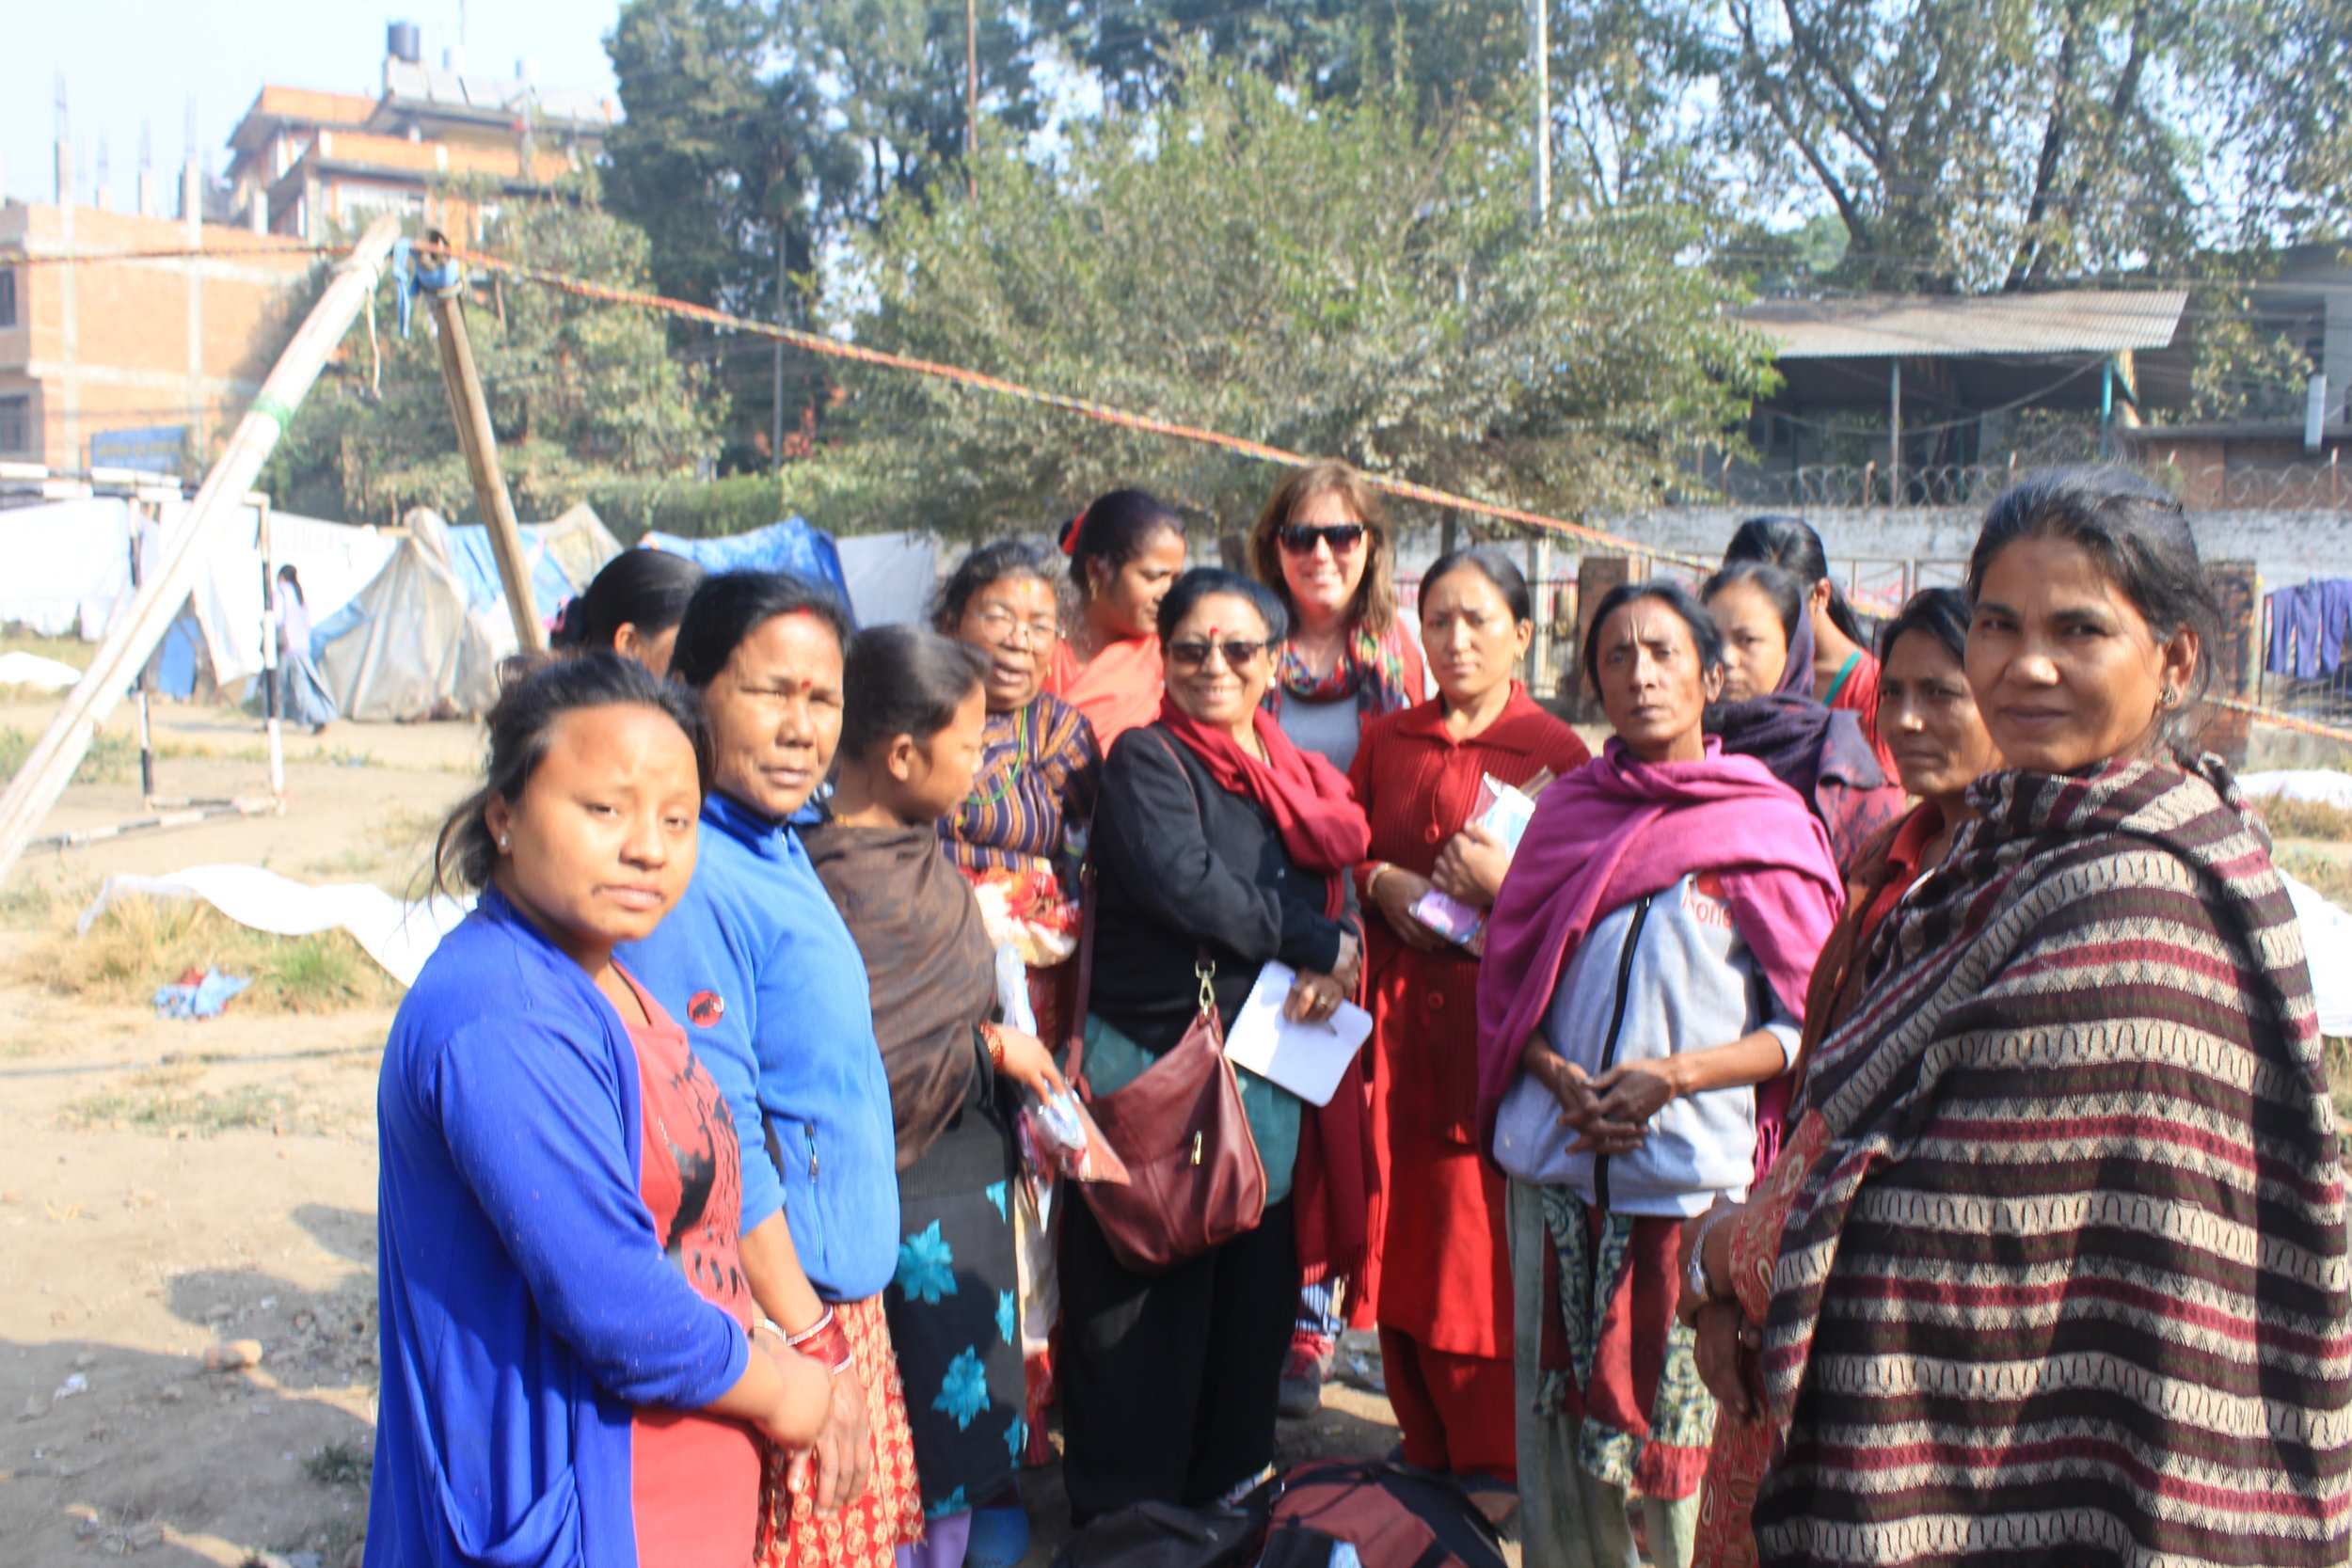 distribution of washable menstruation kits to women living in the Kathmandu tent cities